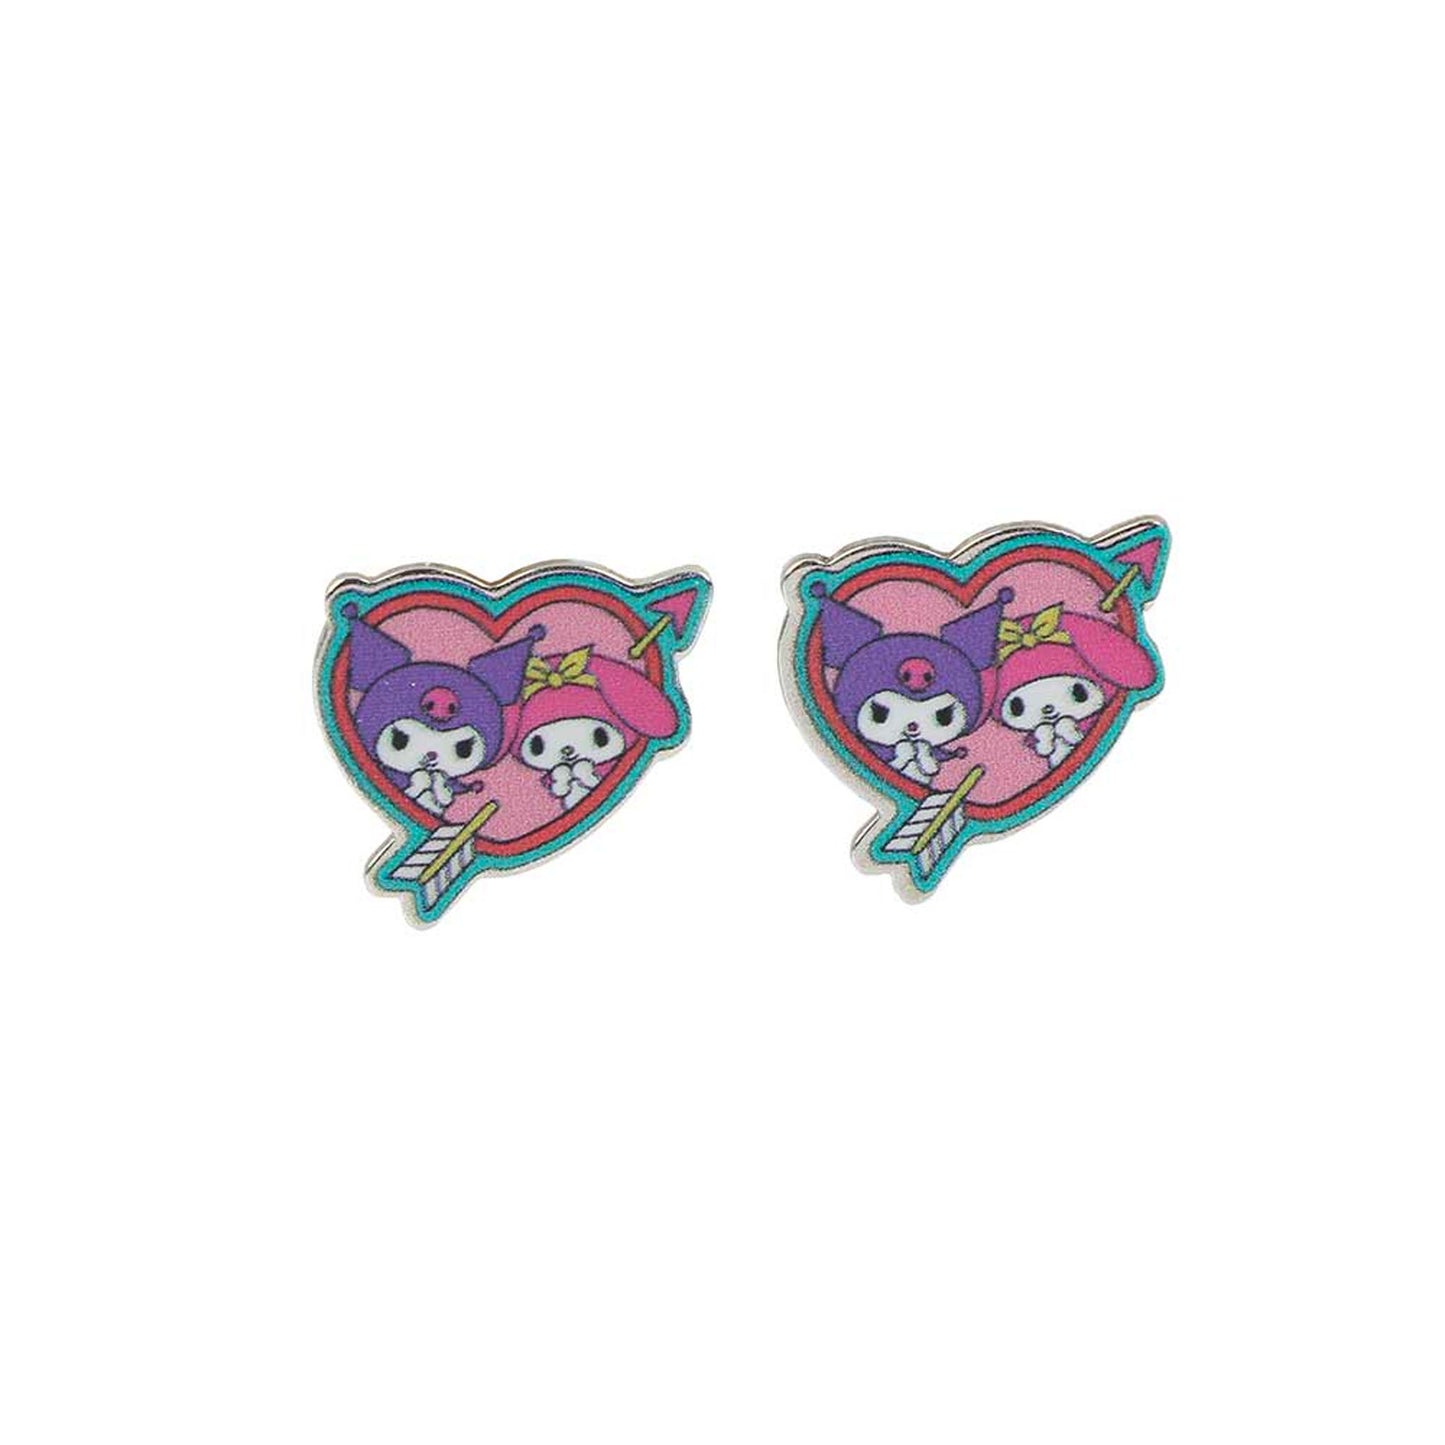 Hello Kitty and Friends (Sanrio) Mix & Match Earring Set